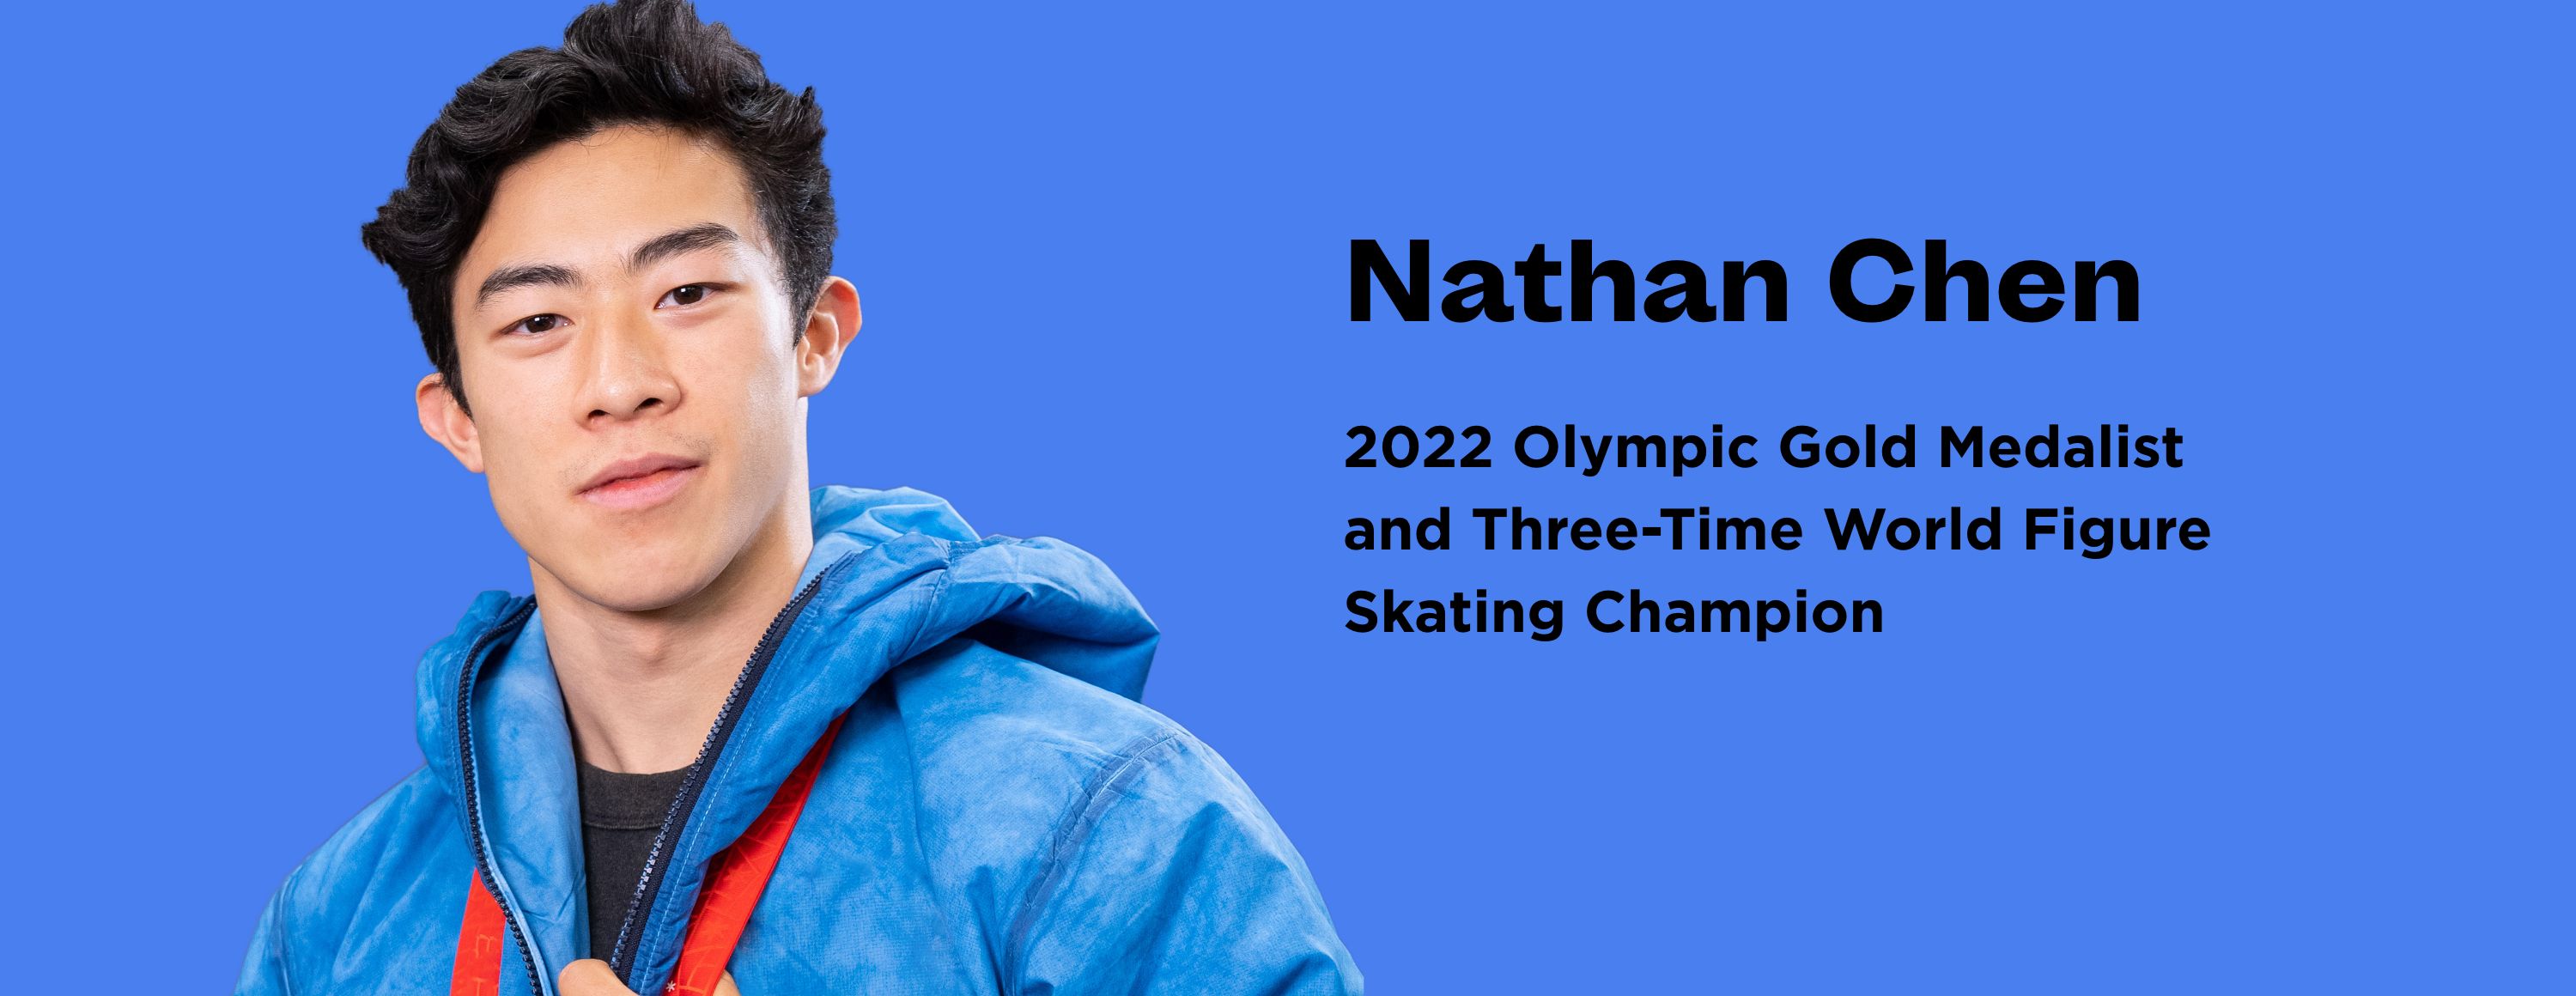 Nathan Chen: 2022 Olympic Gold Medalist and Three-Time World Figure Skating Champion